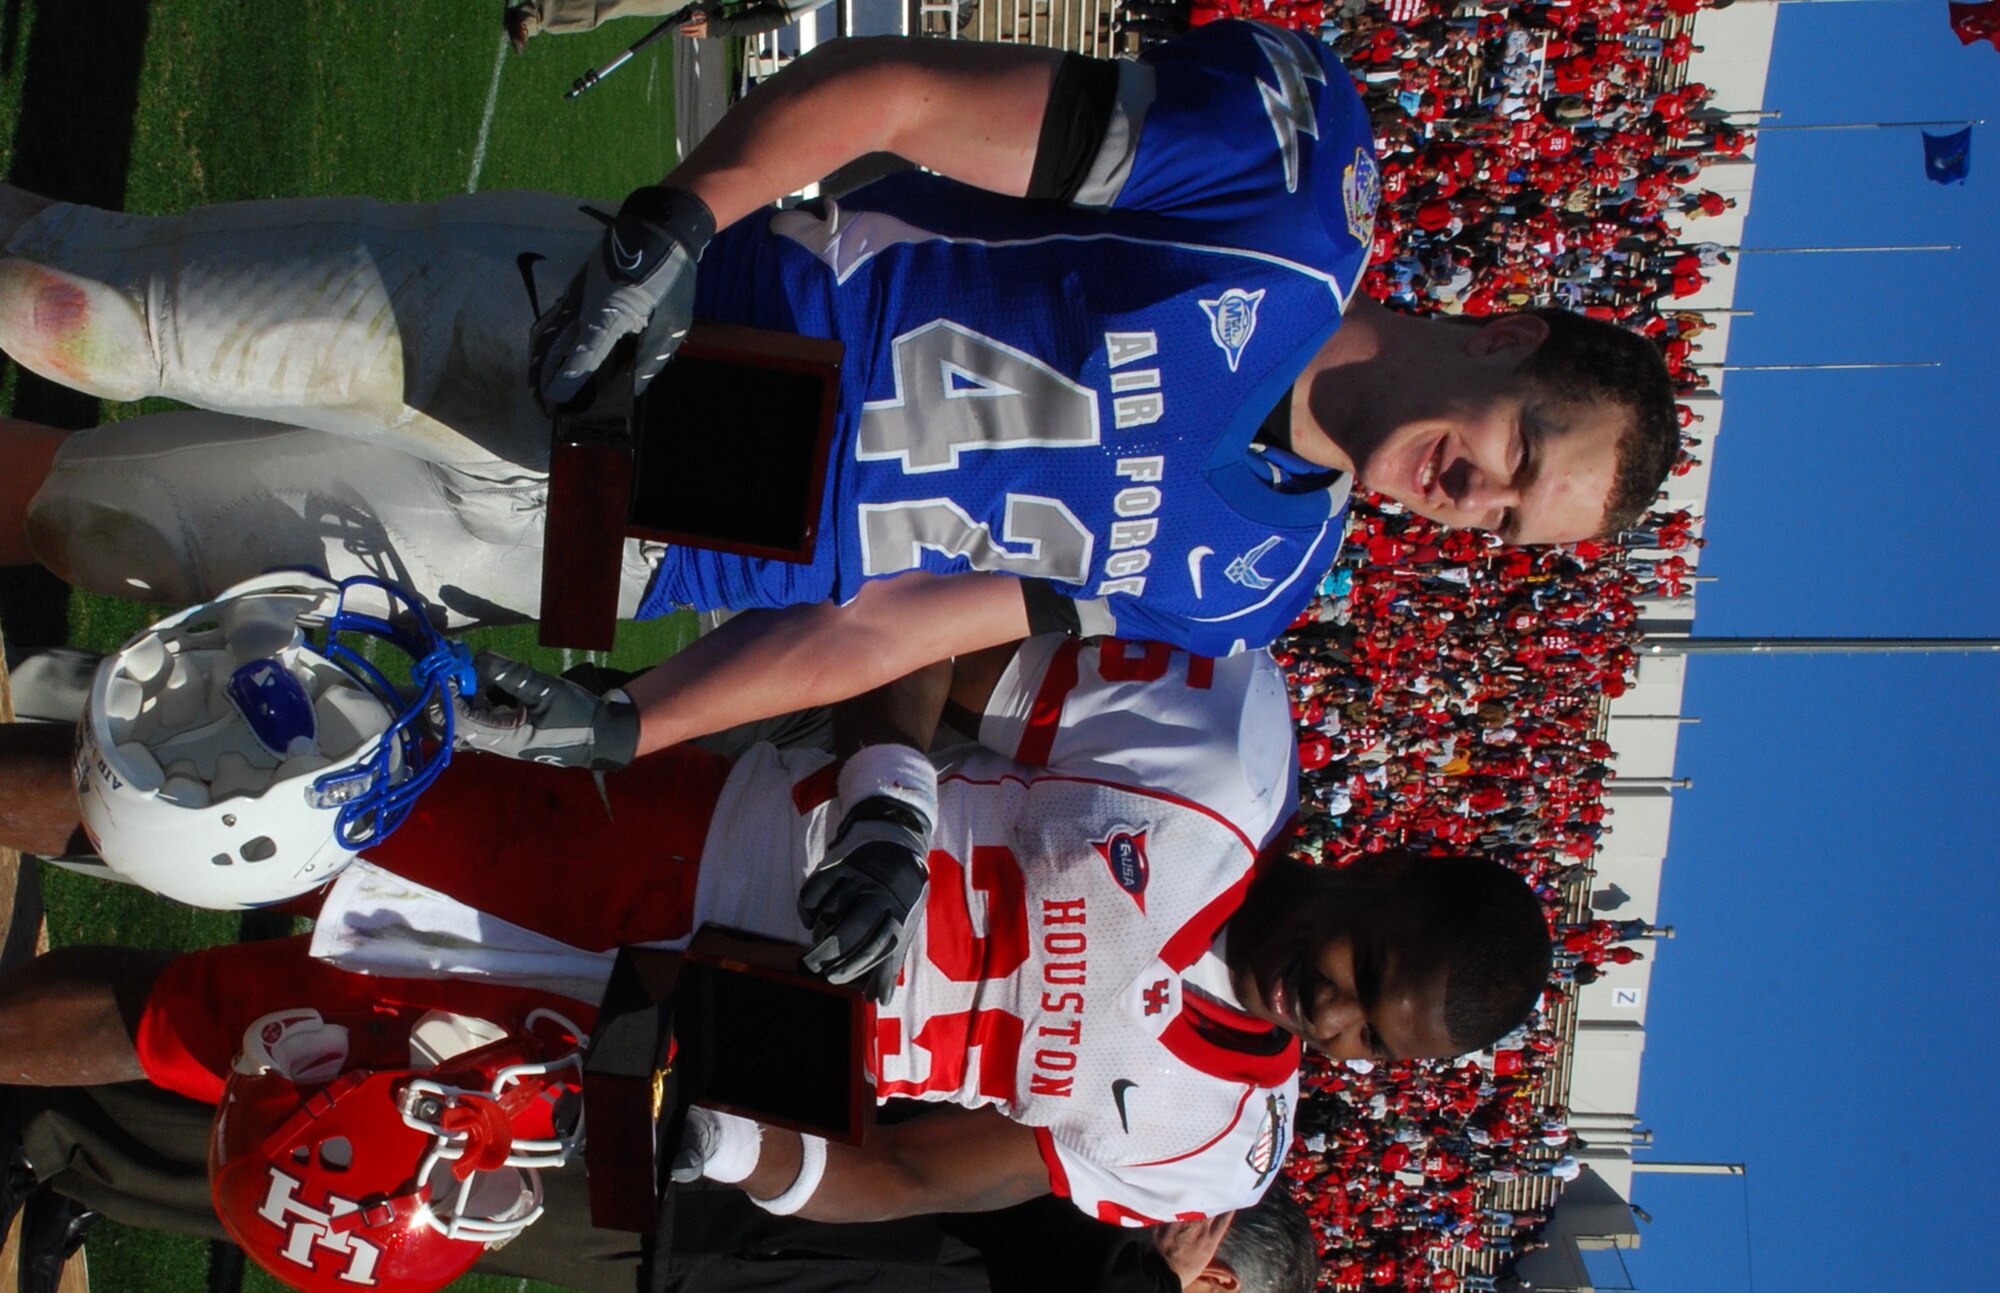 The 2008 Armed Forces Bowl Most Valuable Players accept their award in front of a Fort Worth, Texas crowd. Air Force MVP was fullback sophomore Jared Tew and Houston's MVP was freshman running back, Bryce Beall. The cougars defeated the falcons, 34 to 28. (U.S. Air Force Photo/Tech. Sgt. Julie Briden-Garcia)